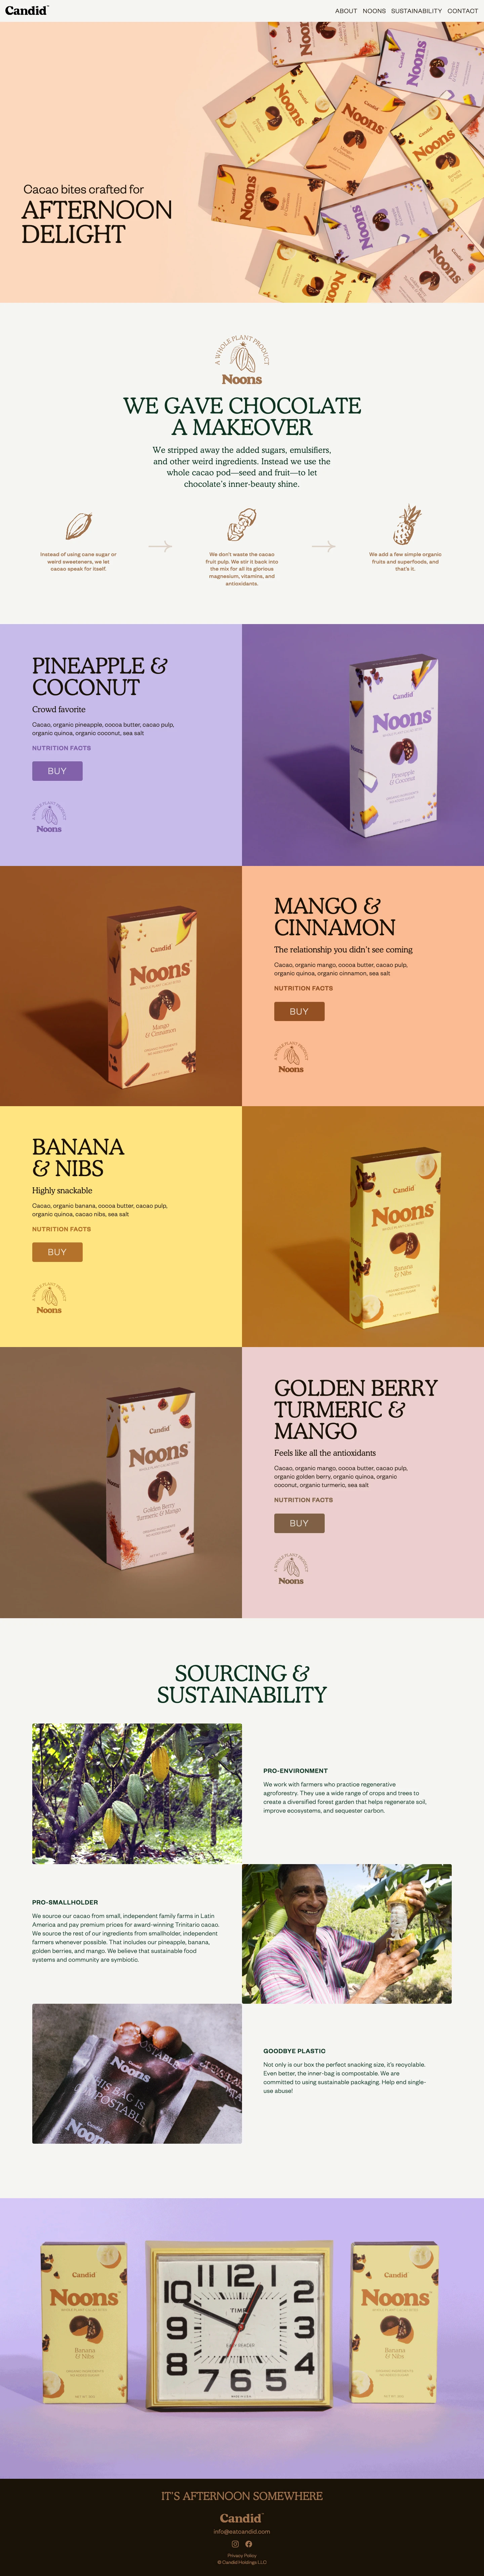 Candid Landing Page Example:  We gave chocolate a makeover. We stripped away the added sugars, emulsifiers, and other weird ingredients. Instead we use the whole cacao pod—seed and fruit—to let chocolate’s inner-beauty shine.